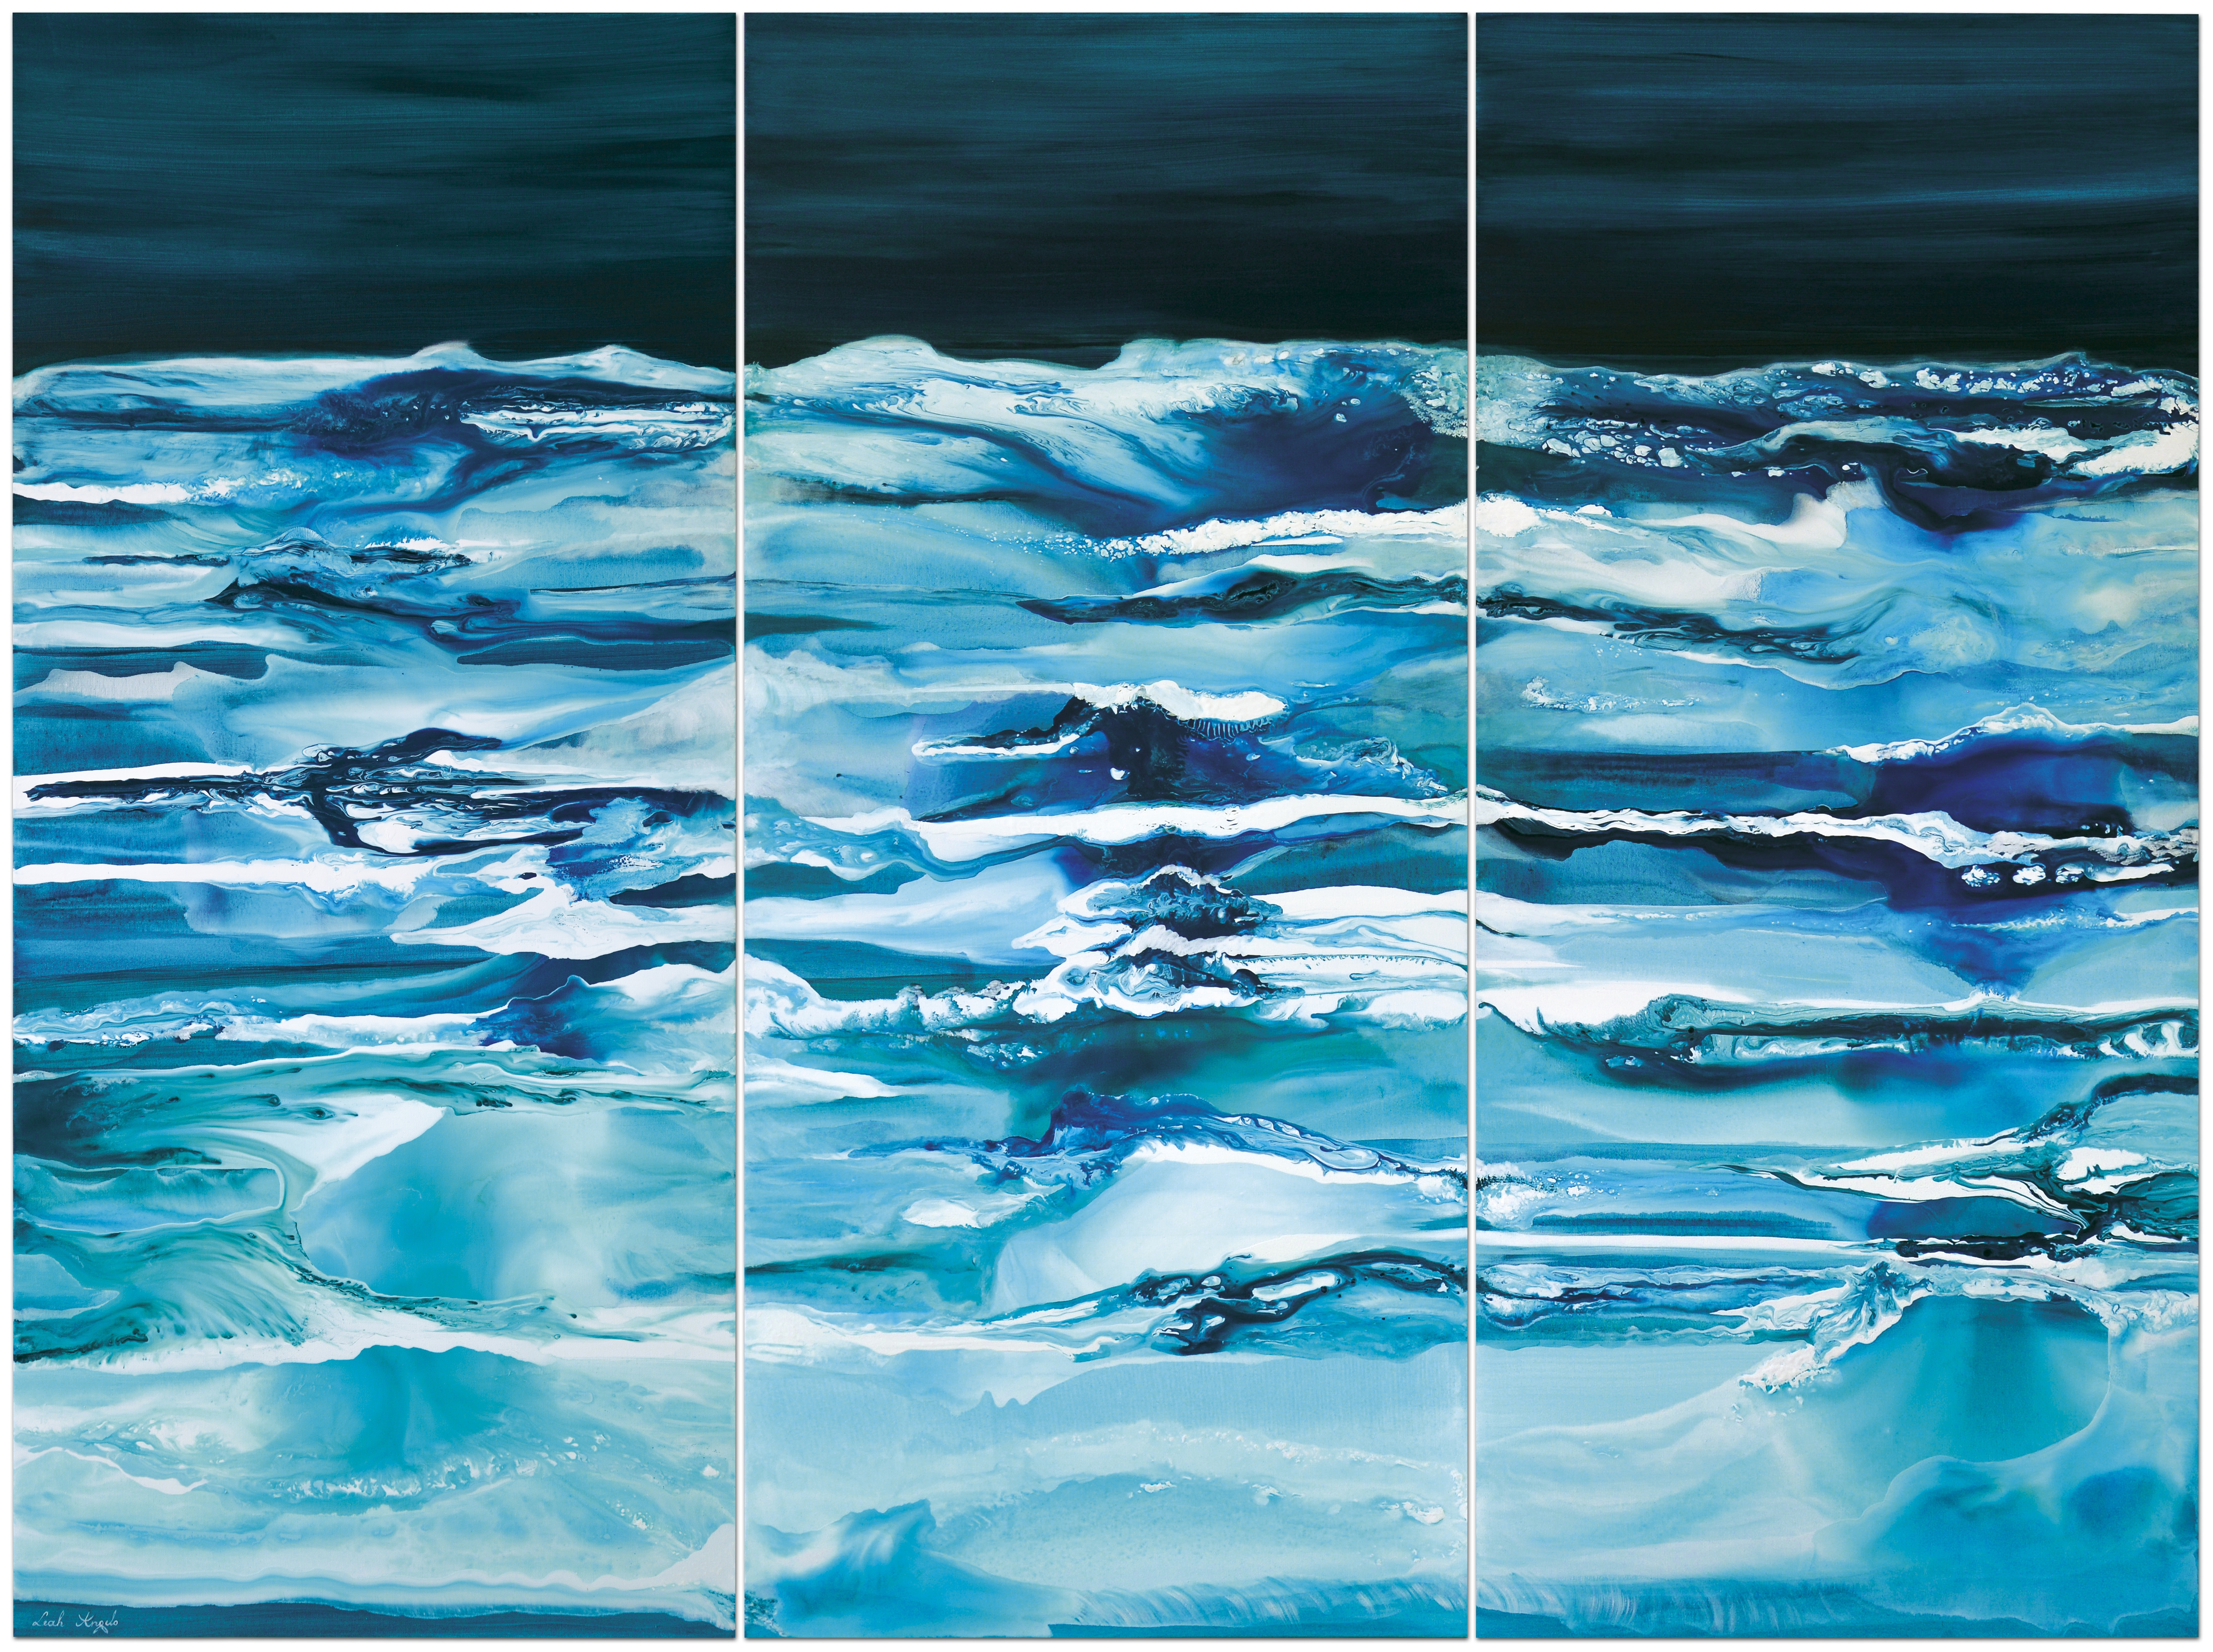 A NIGHT IN PARADISE -  Leah Angelo - Triptych (240 x 180 cm)  Acrylics on Canvas                                                                                                                                                                               